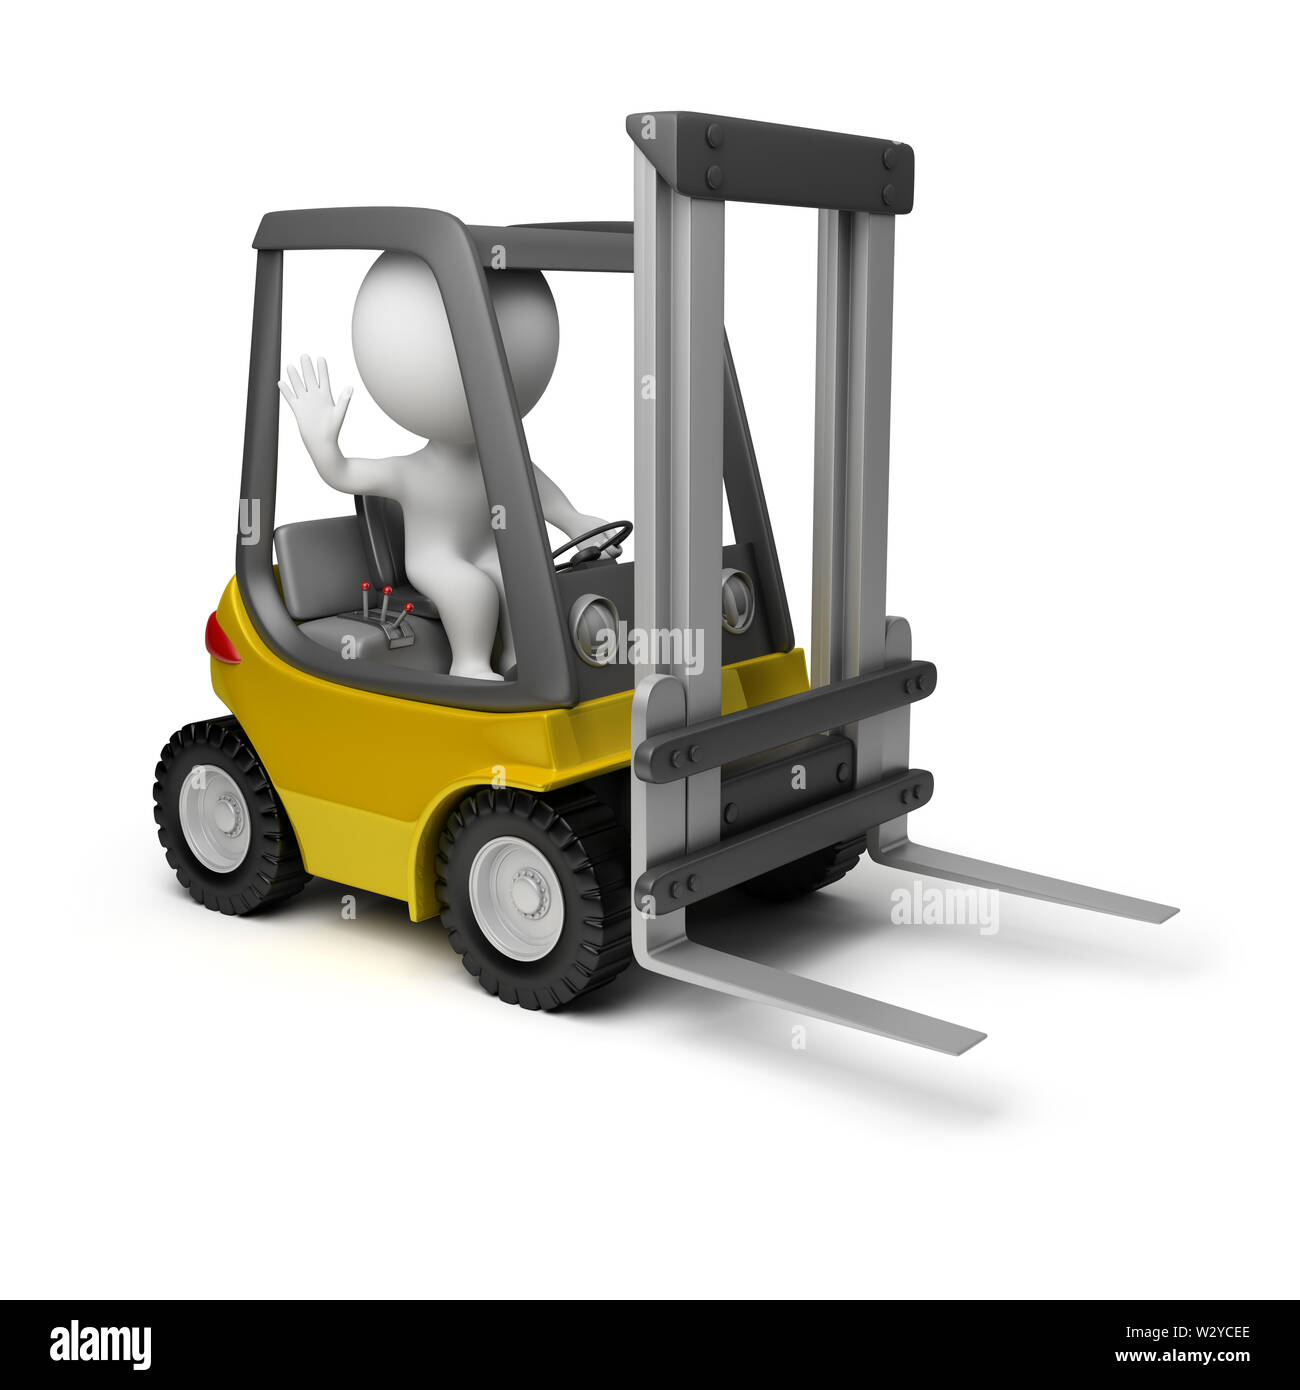 3d small person sitting in a forklift. 3d image. Isolated white background. Stock Photo